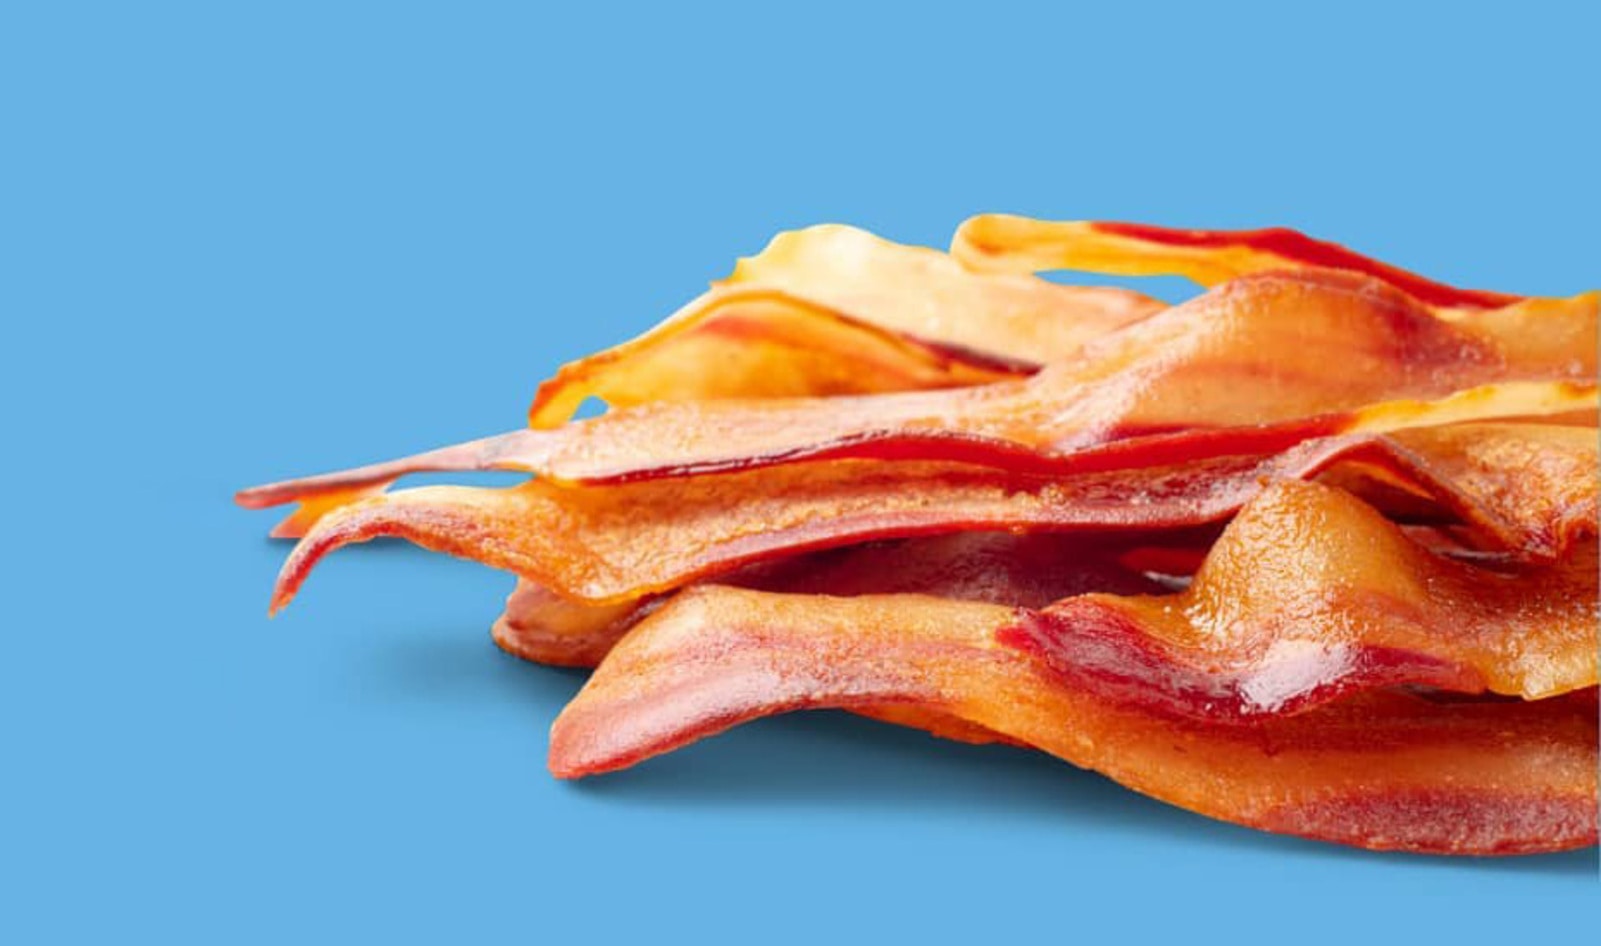 New Vegan Bacon to Launch at Whole Foods